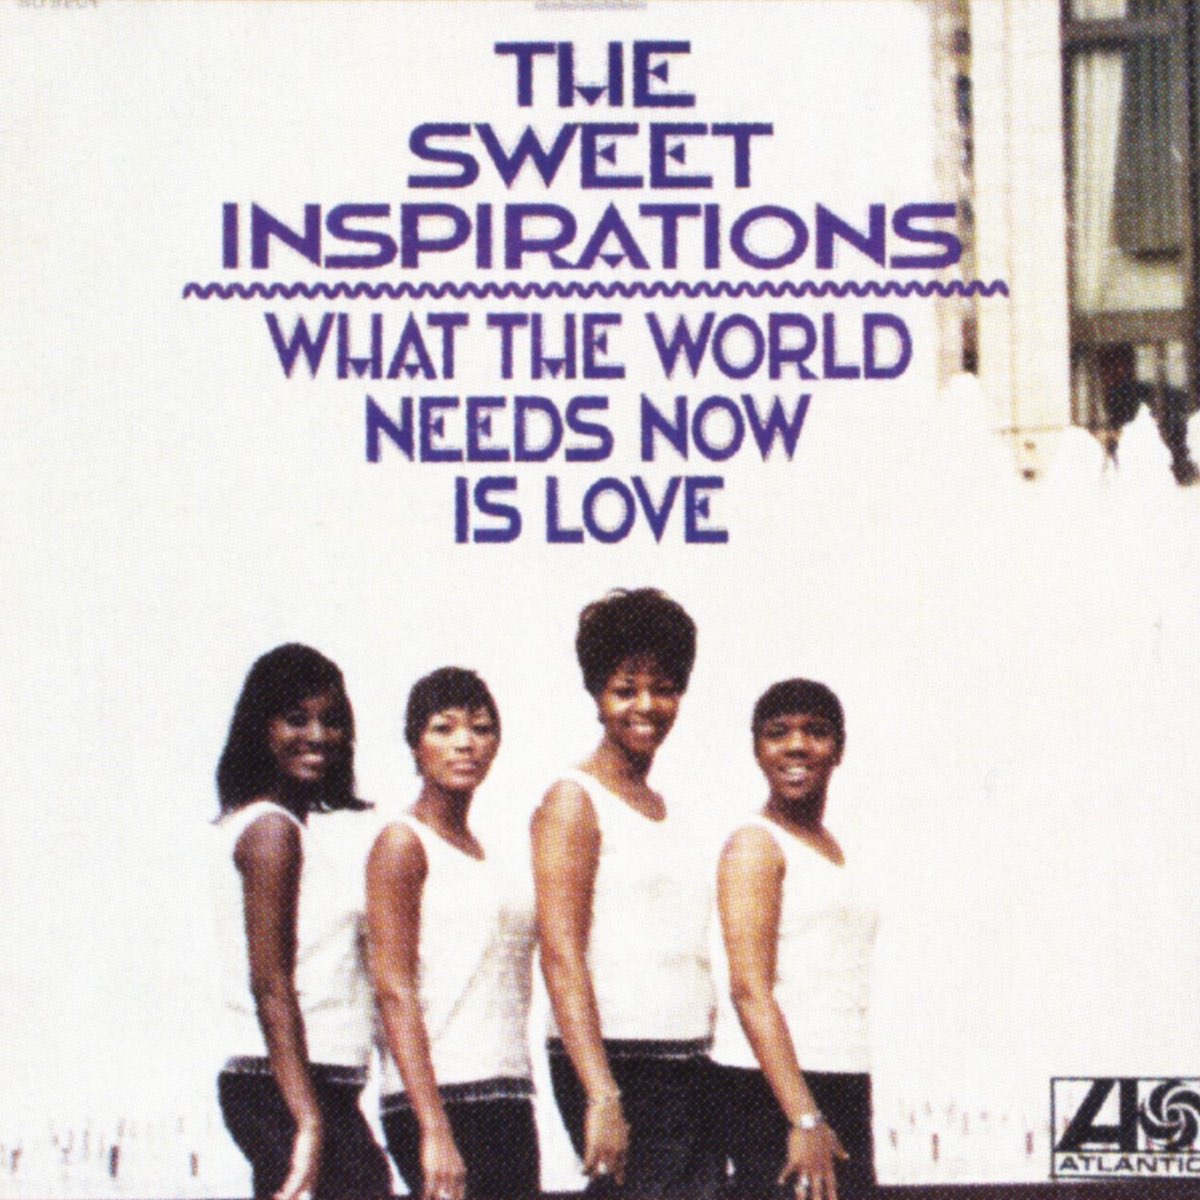 Need somebody to love. What the World needs Now is Love. Sweet. The World needs Love. The Sweet inspirations.